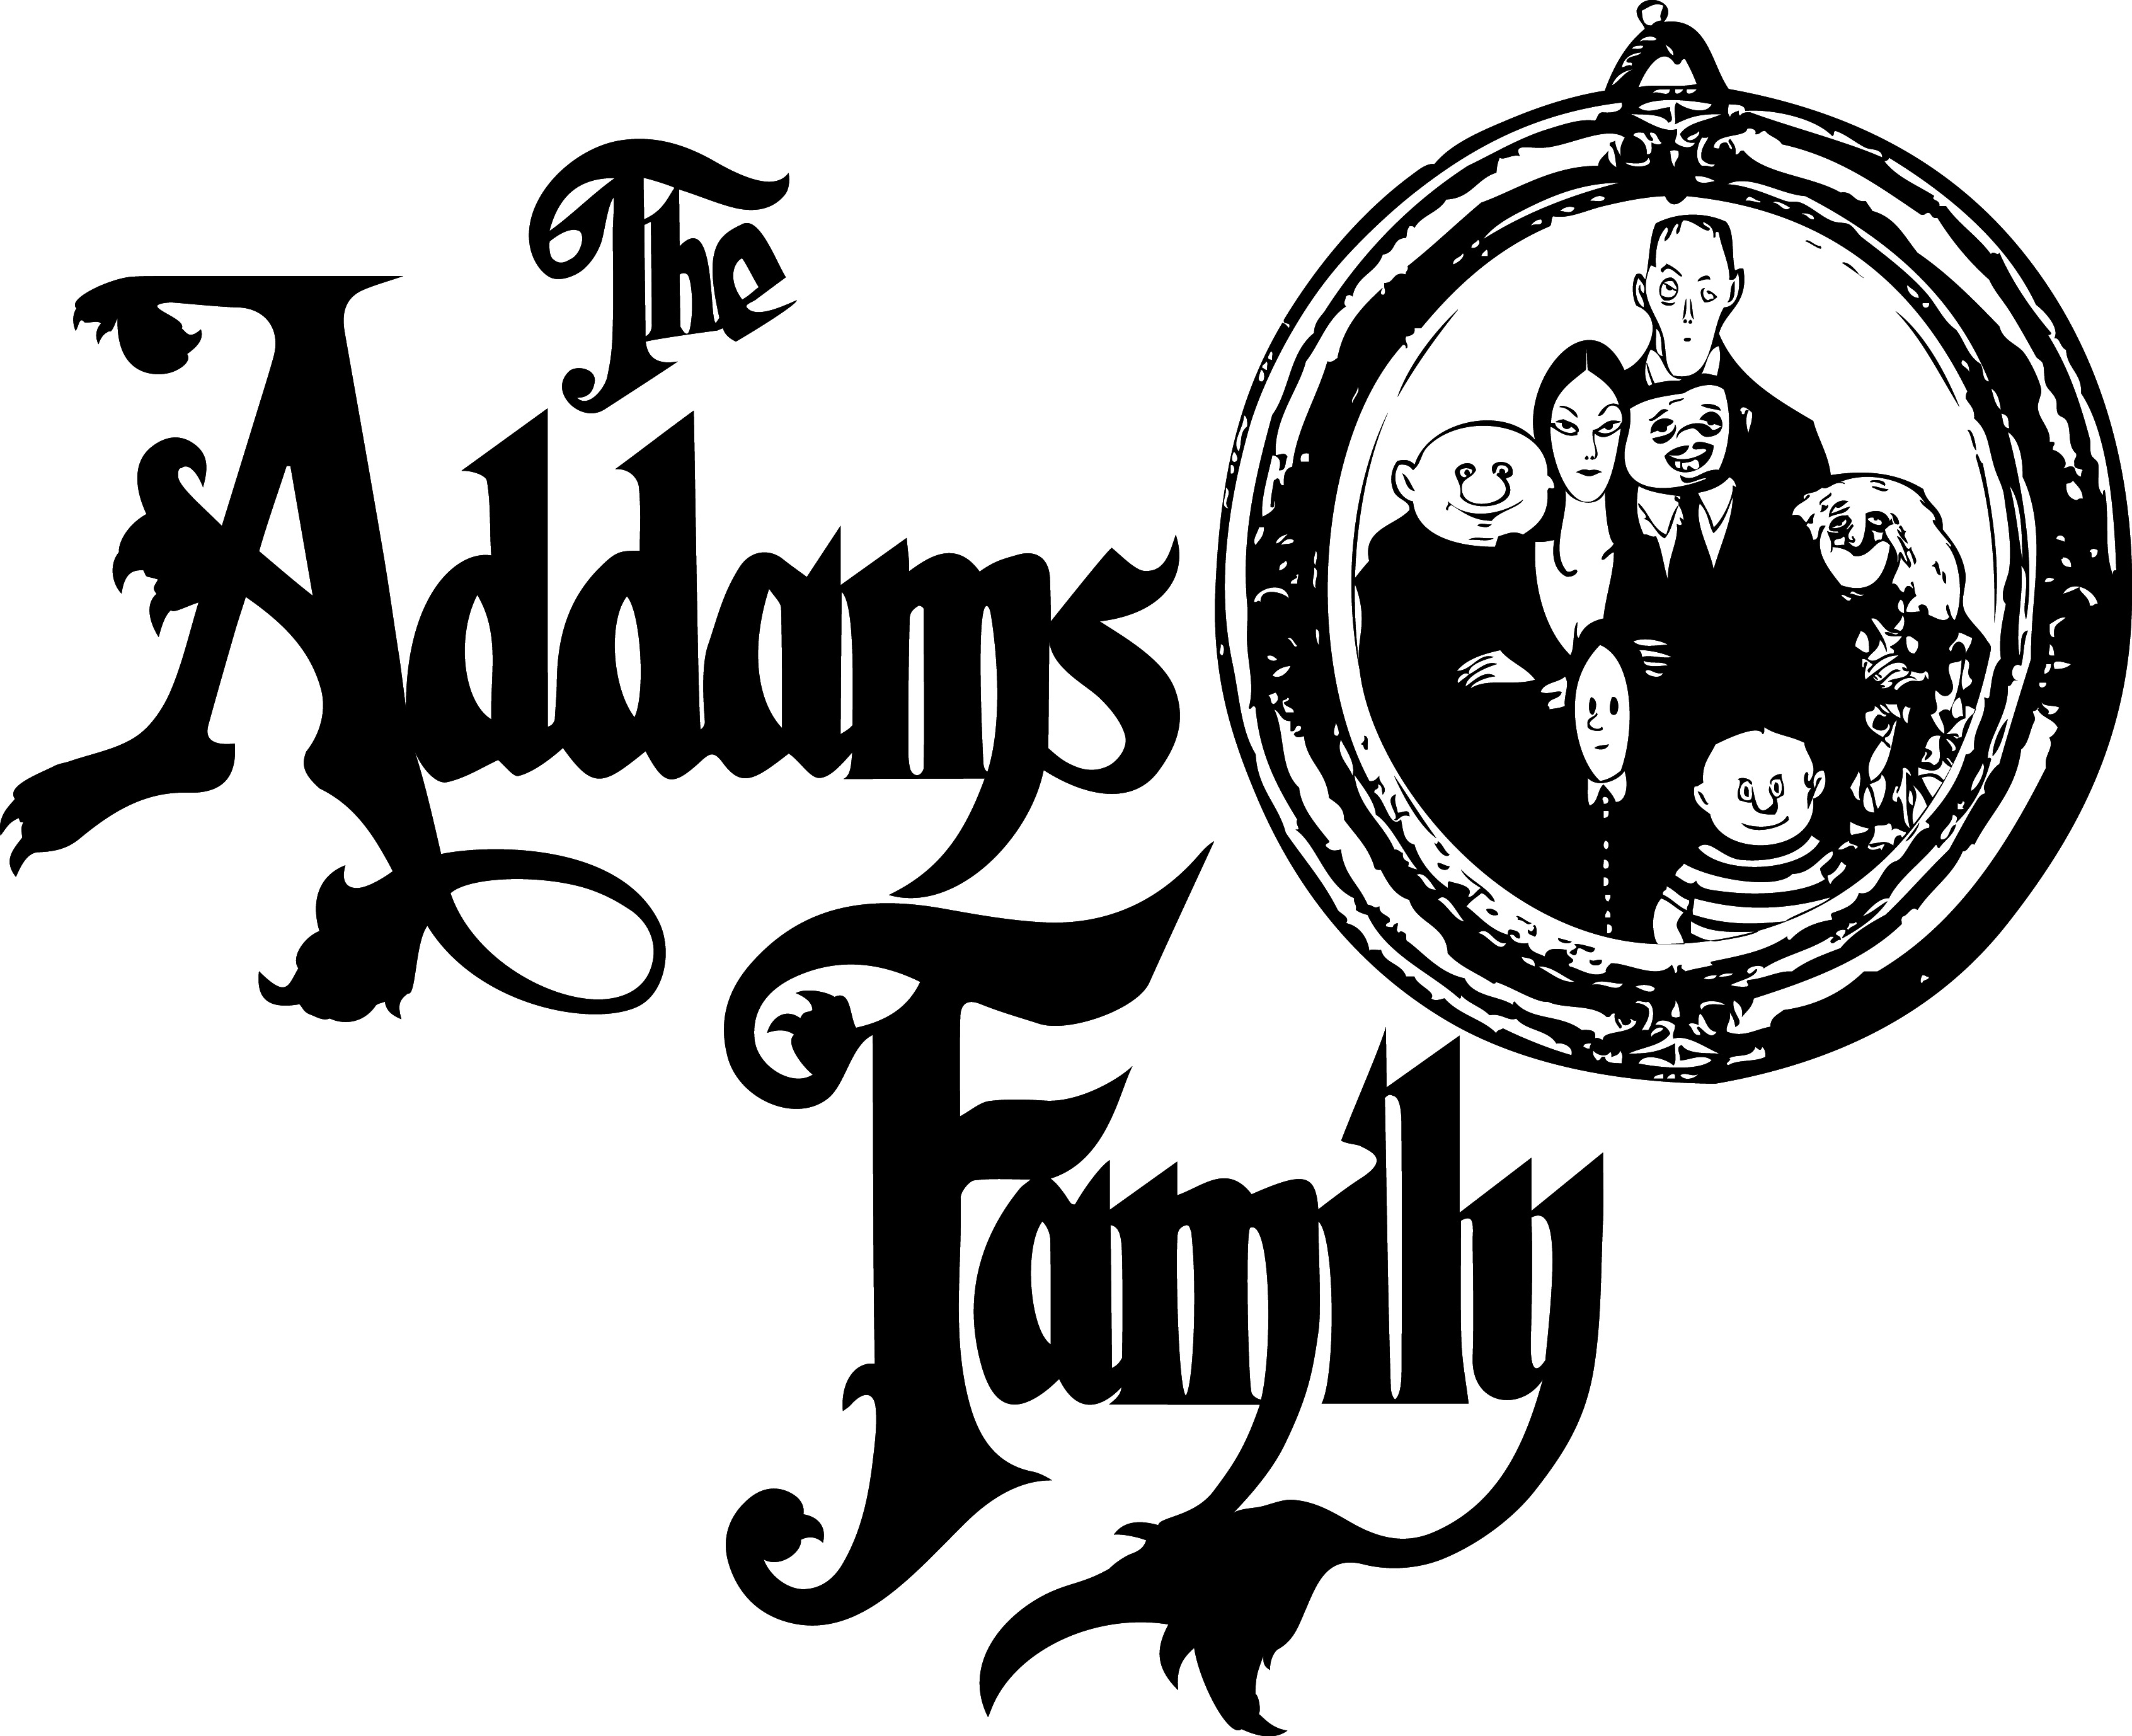 The Addams Family icons